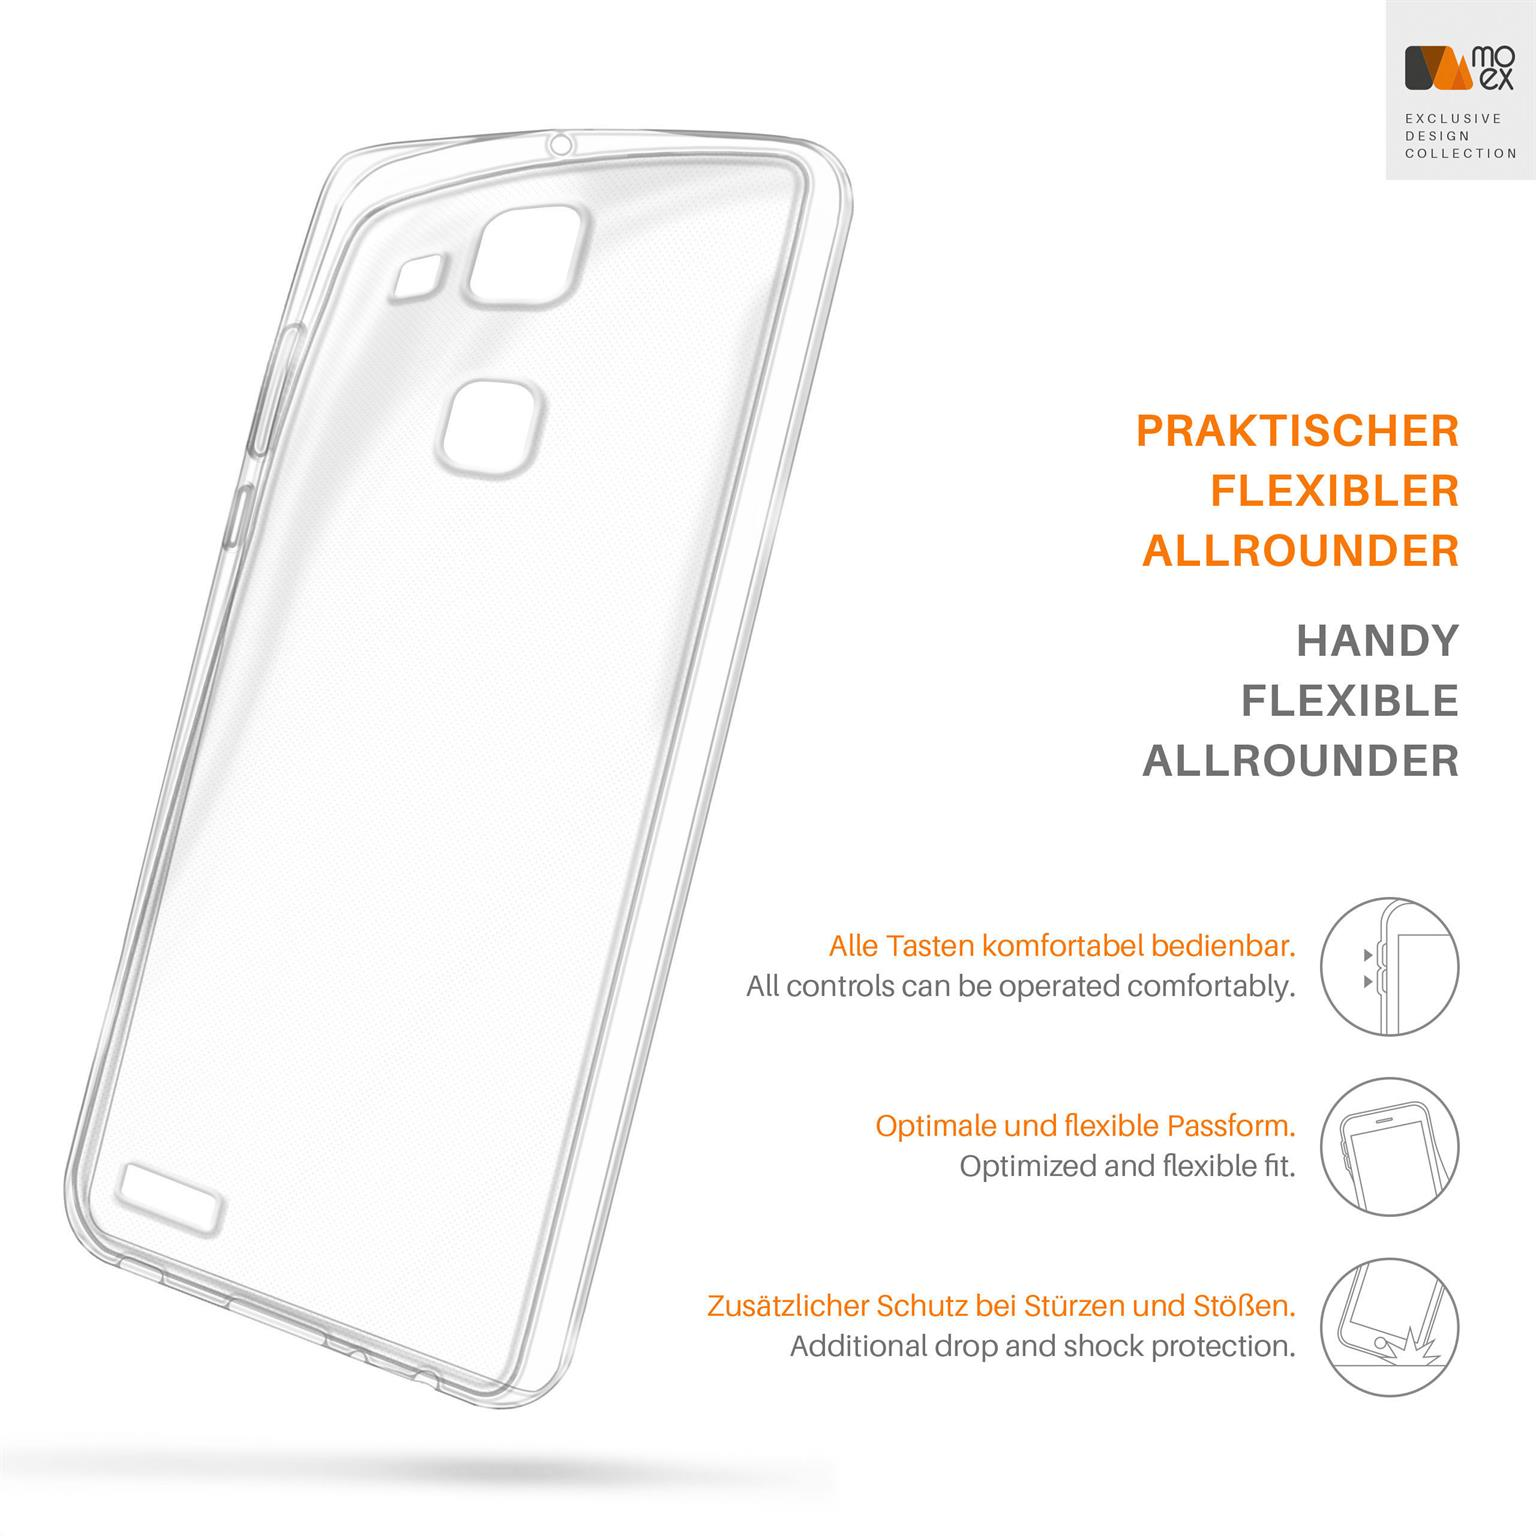 MOEX Aero Backcover, Huawei, Ascend Crystal-Clear Case, 7, Mate